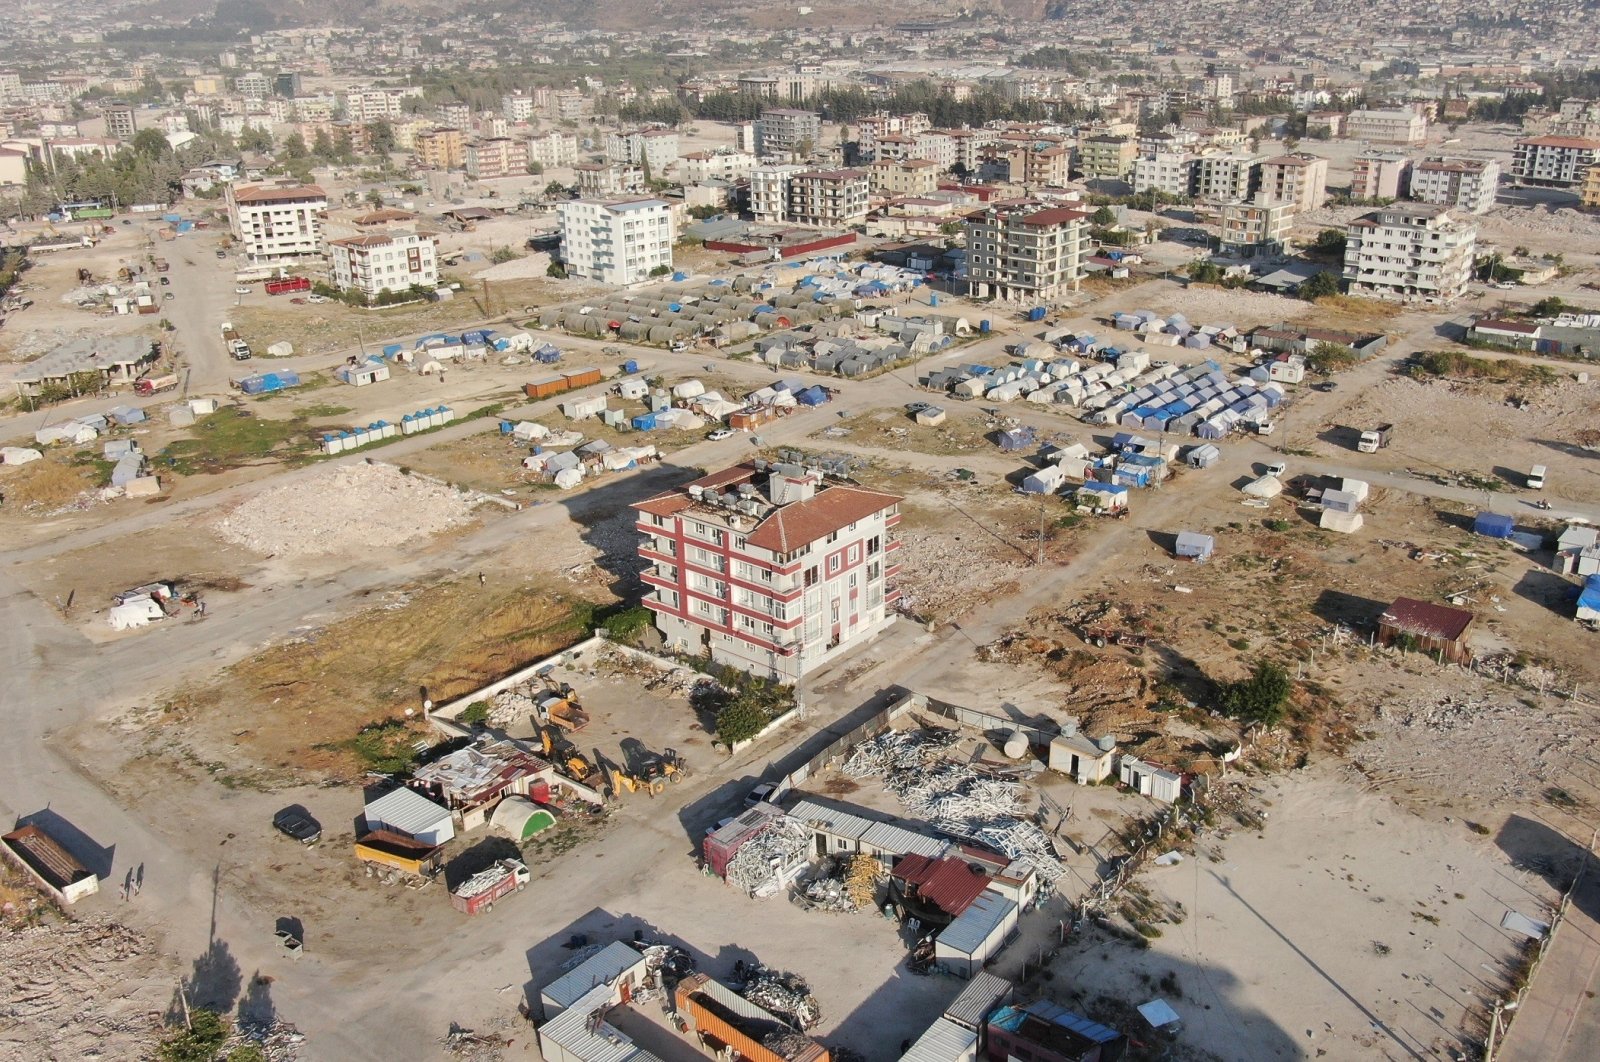 The debris removal process continues after the devastating earthquakes in Hatay, Türkiye, Sept. 6, 2023. (IHA Photo)